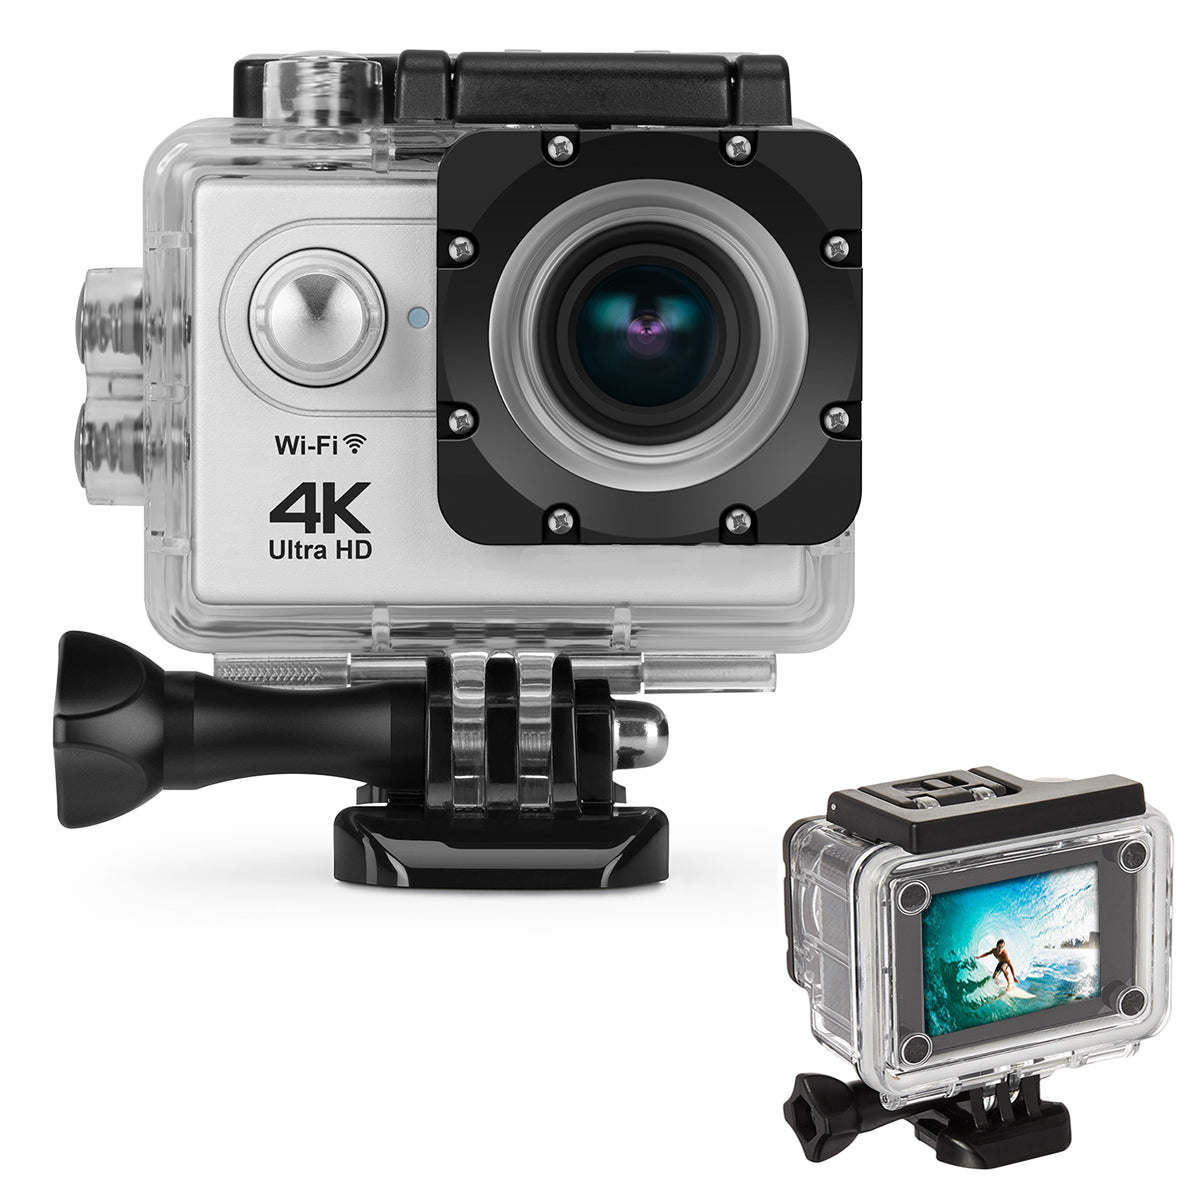 4K Action Pro Waterproof All Digital UHD WiFi Camera + RF Remote And Accessories